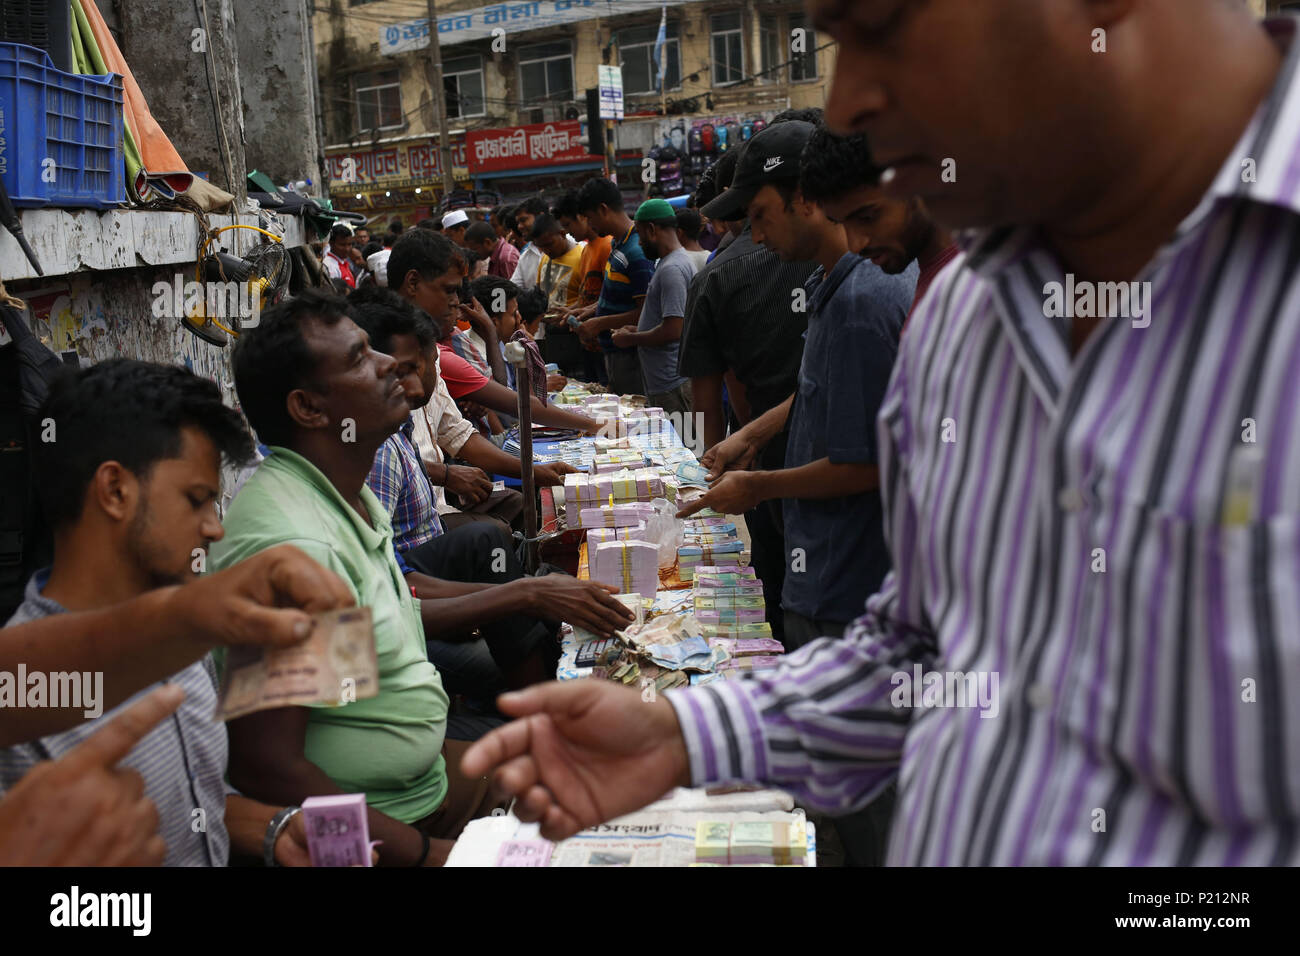 Dhaka, Bangladesh. 11th June, 2018. Street vendors wait for customers as they display fresh bank notes for sale as exchange for a rate of an addition ahead of Eid. Fresh notes demand increase for eid festival as people give for salami (an auspicious token) in Gulistan Avenue. Credit: Md. Mehedi Hasan/ZUMA Wire/Alamy Live News Stock Photo